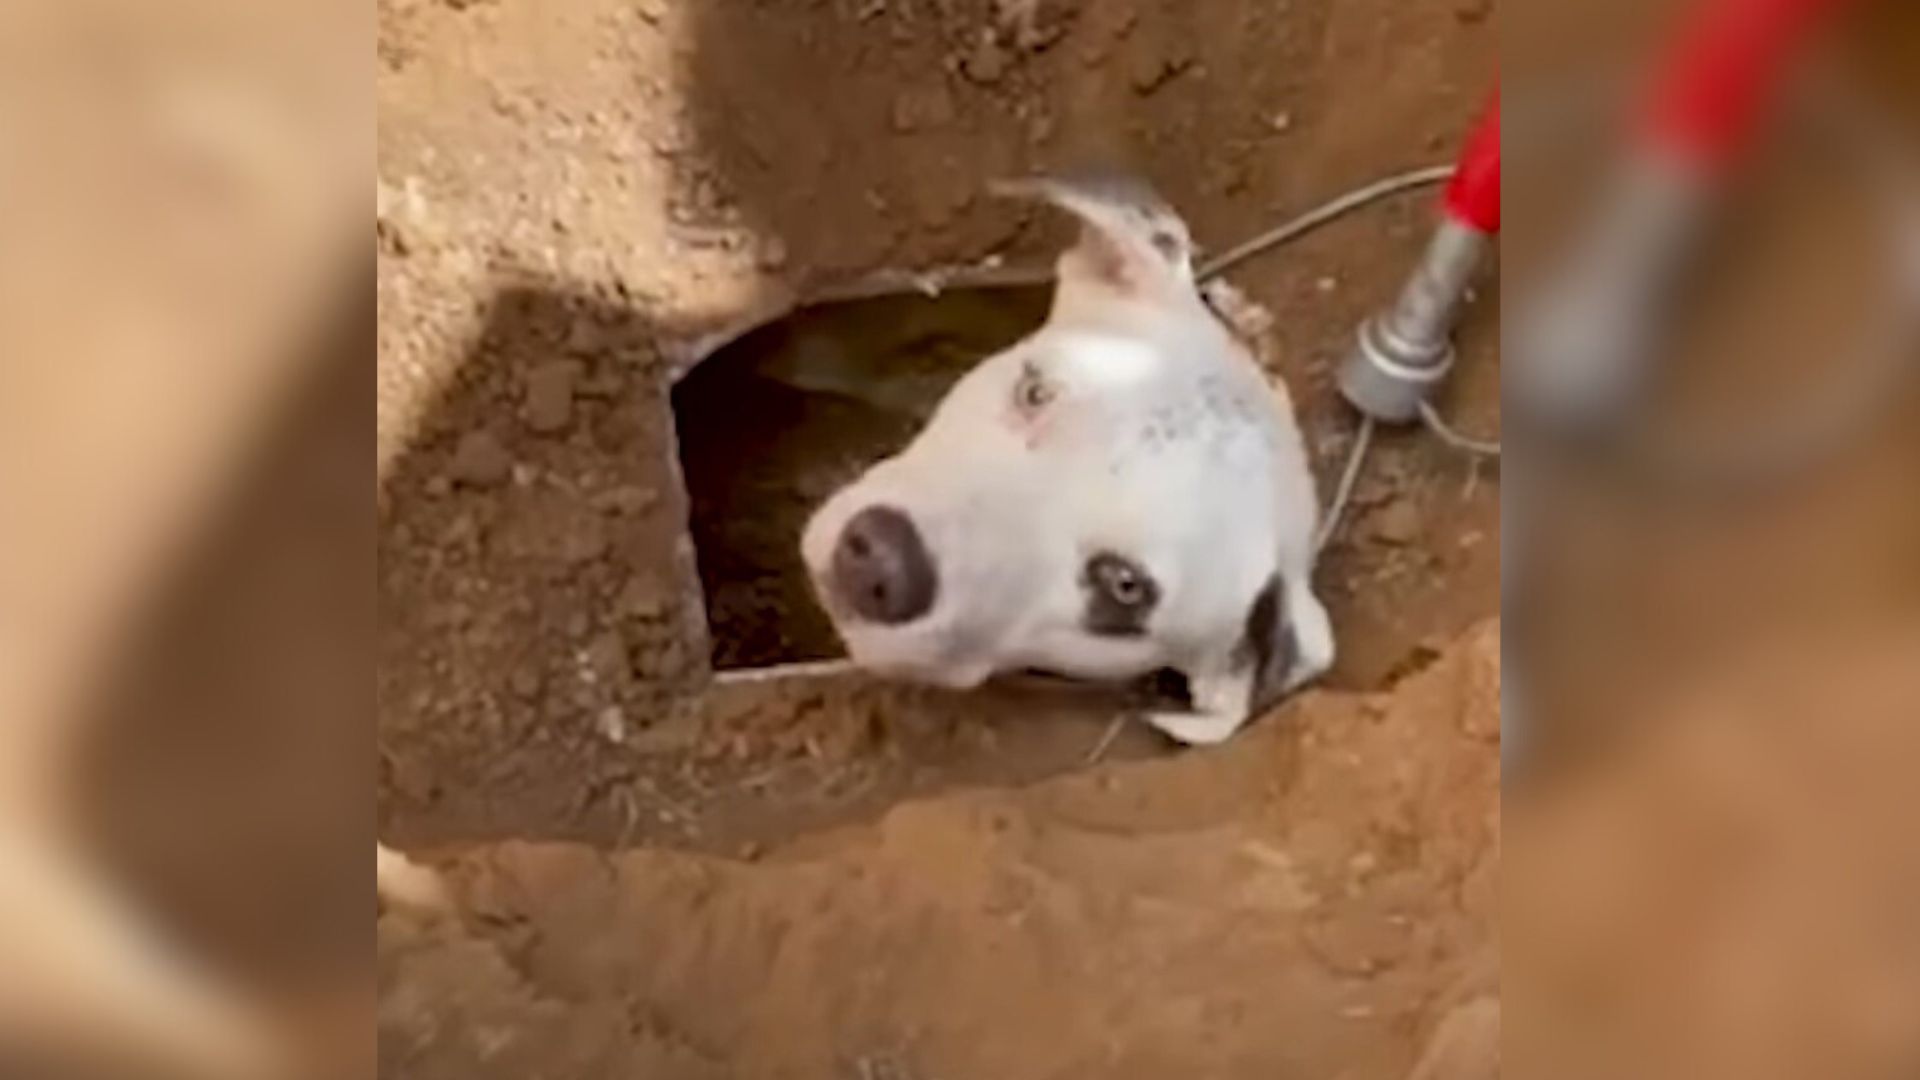 This Dog Was Stuck In A Drainage Pipe Until His Amazing Rescuers Came To His Aid